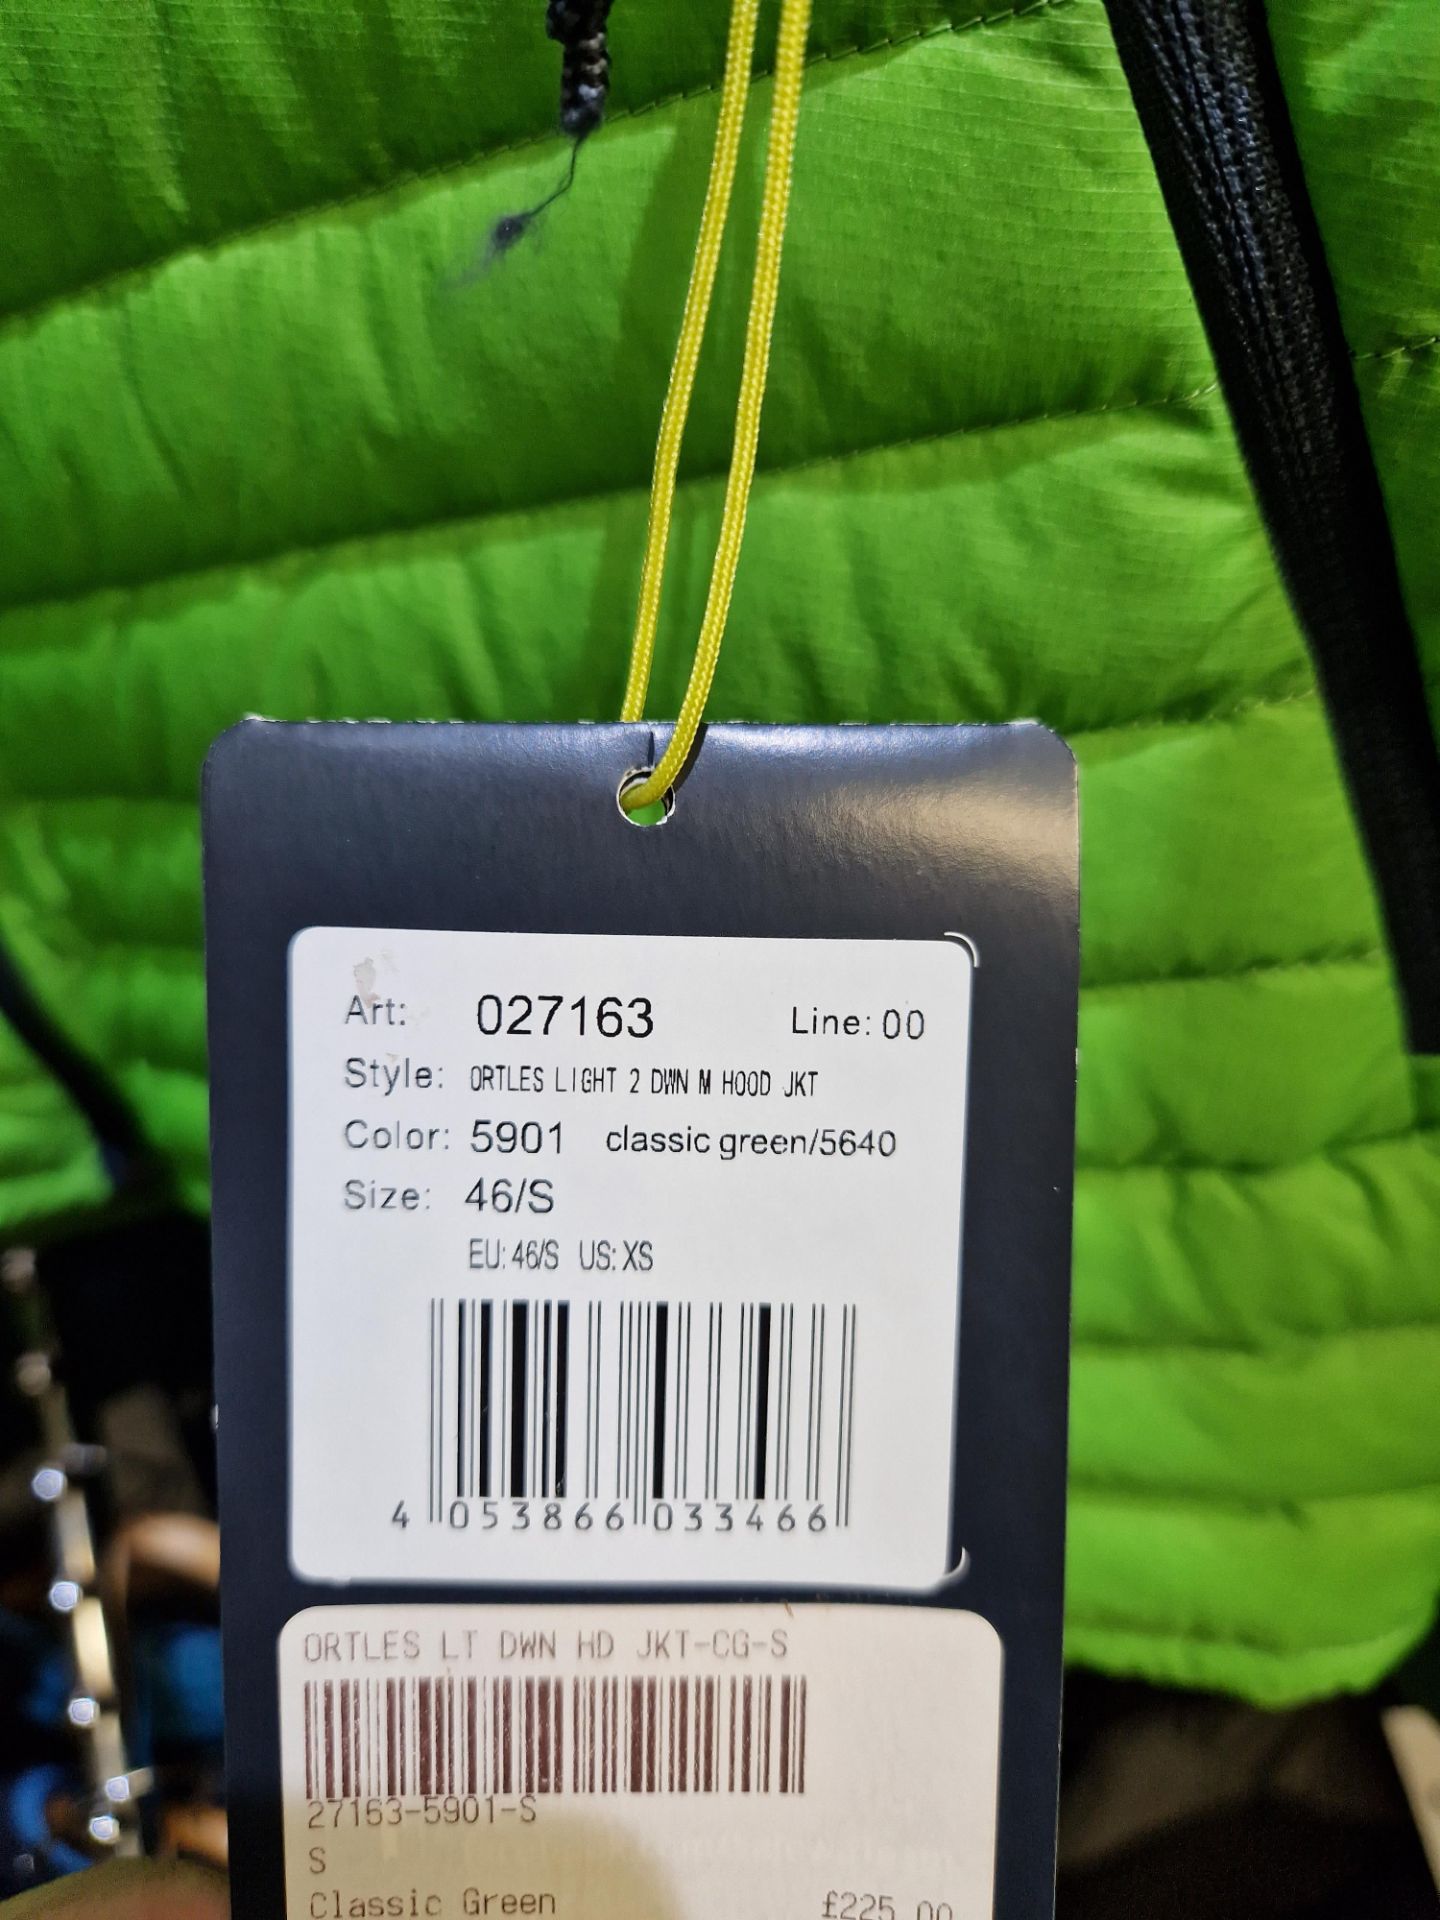 Salewa Pure Mountain Ortles Light 2 Down M Hood Jacket, Colour: Classic Green, Size: 46/S Please - Image 2 of 2